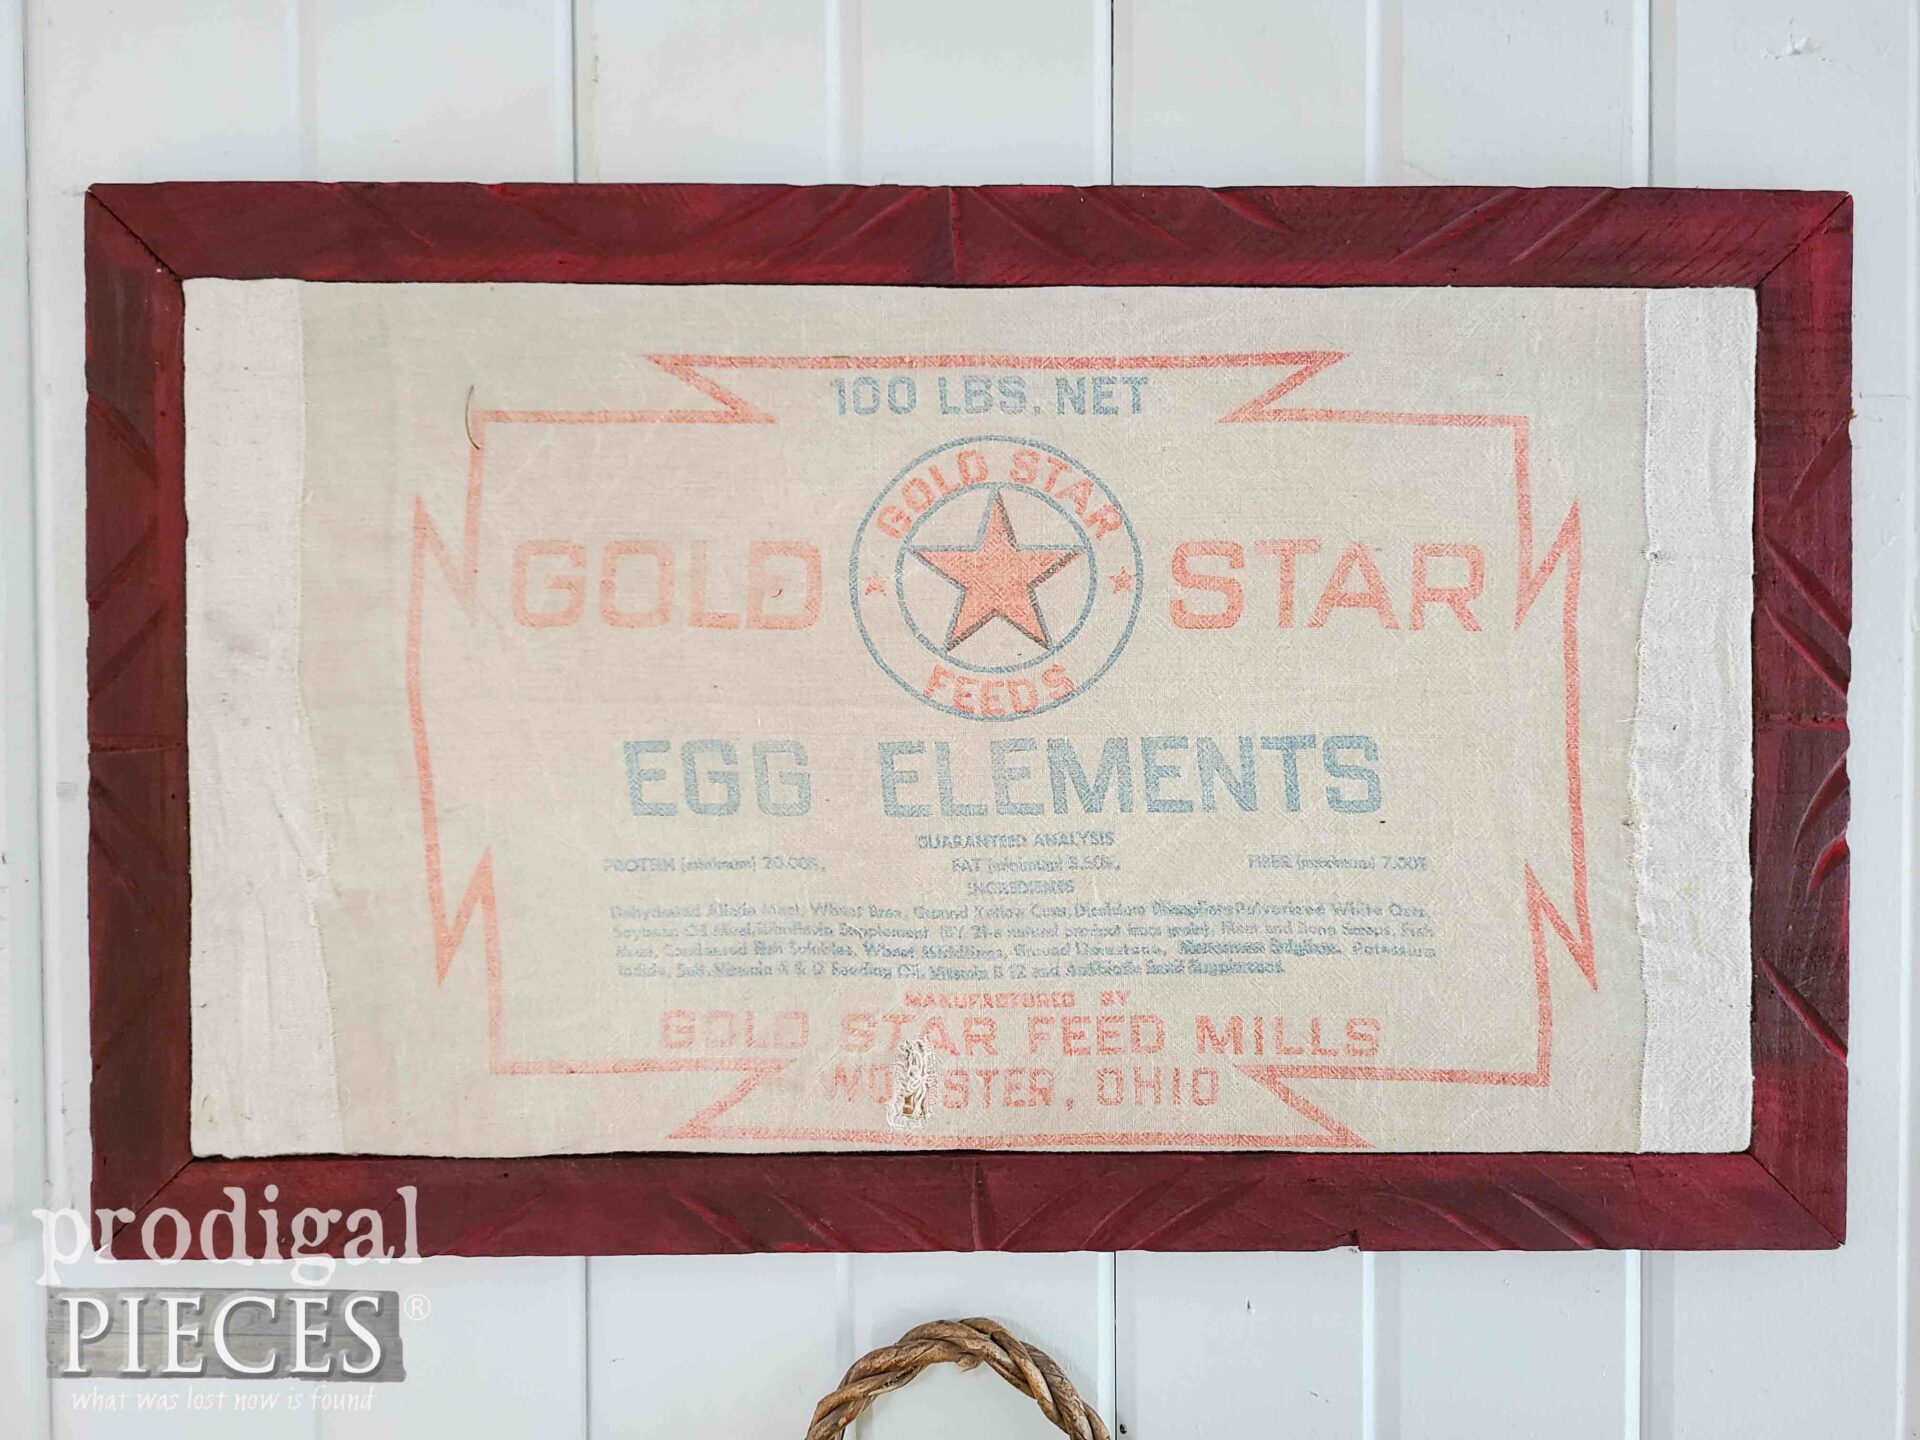 Gold Star Feed Sack Art in Thrifted Frame by Larissa of Prodigal Pieces | prodigalpieces.com #prodigalpieces #handmade #thrifted